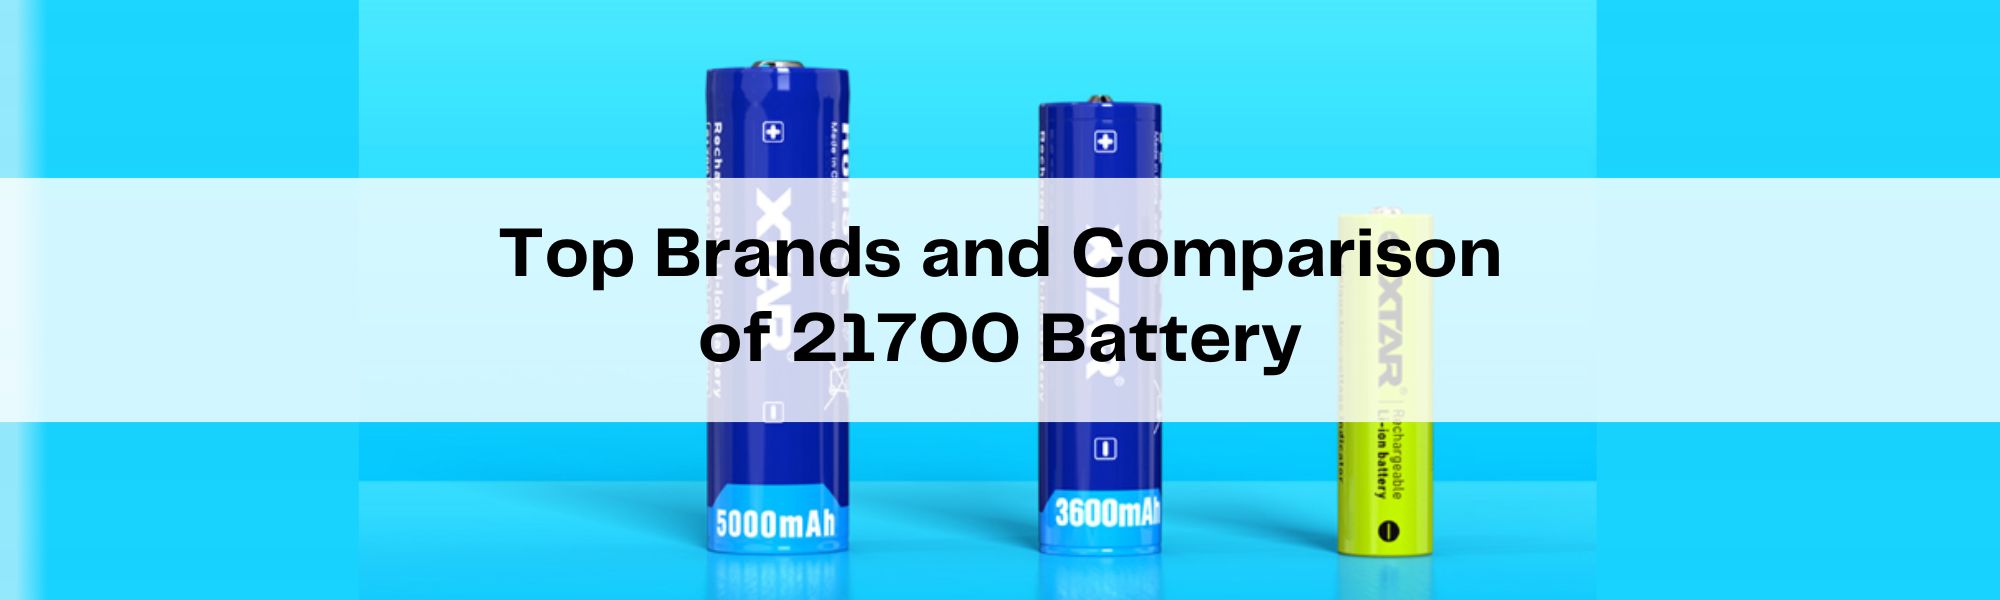 Top brands and battery size comparison of 21700.